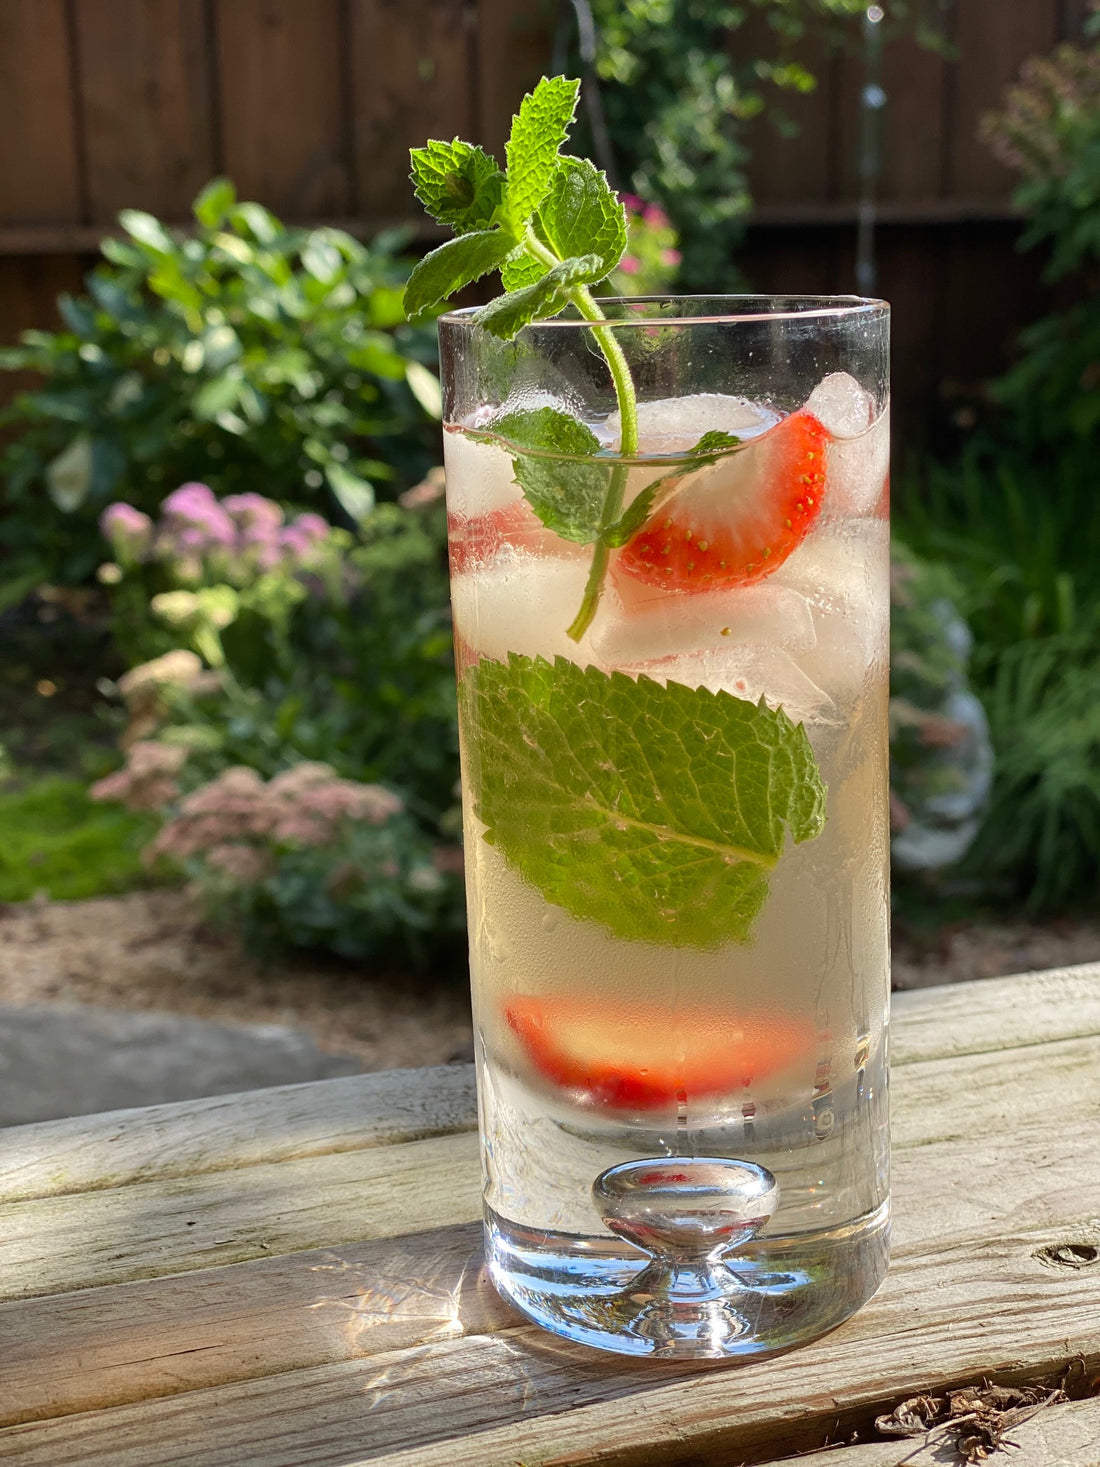 Check out this video to learn how to make a refreshing Mint Jasmine Iced Tea!